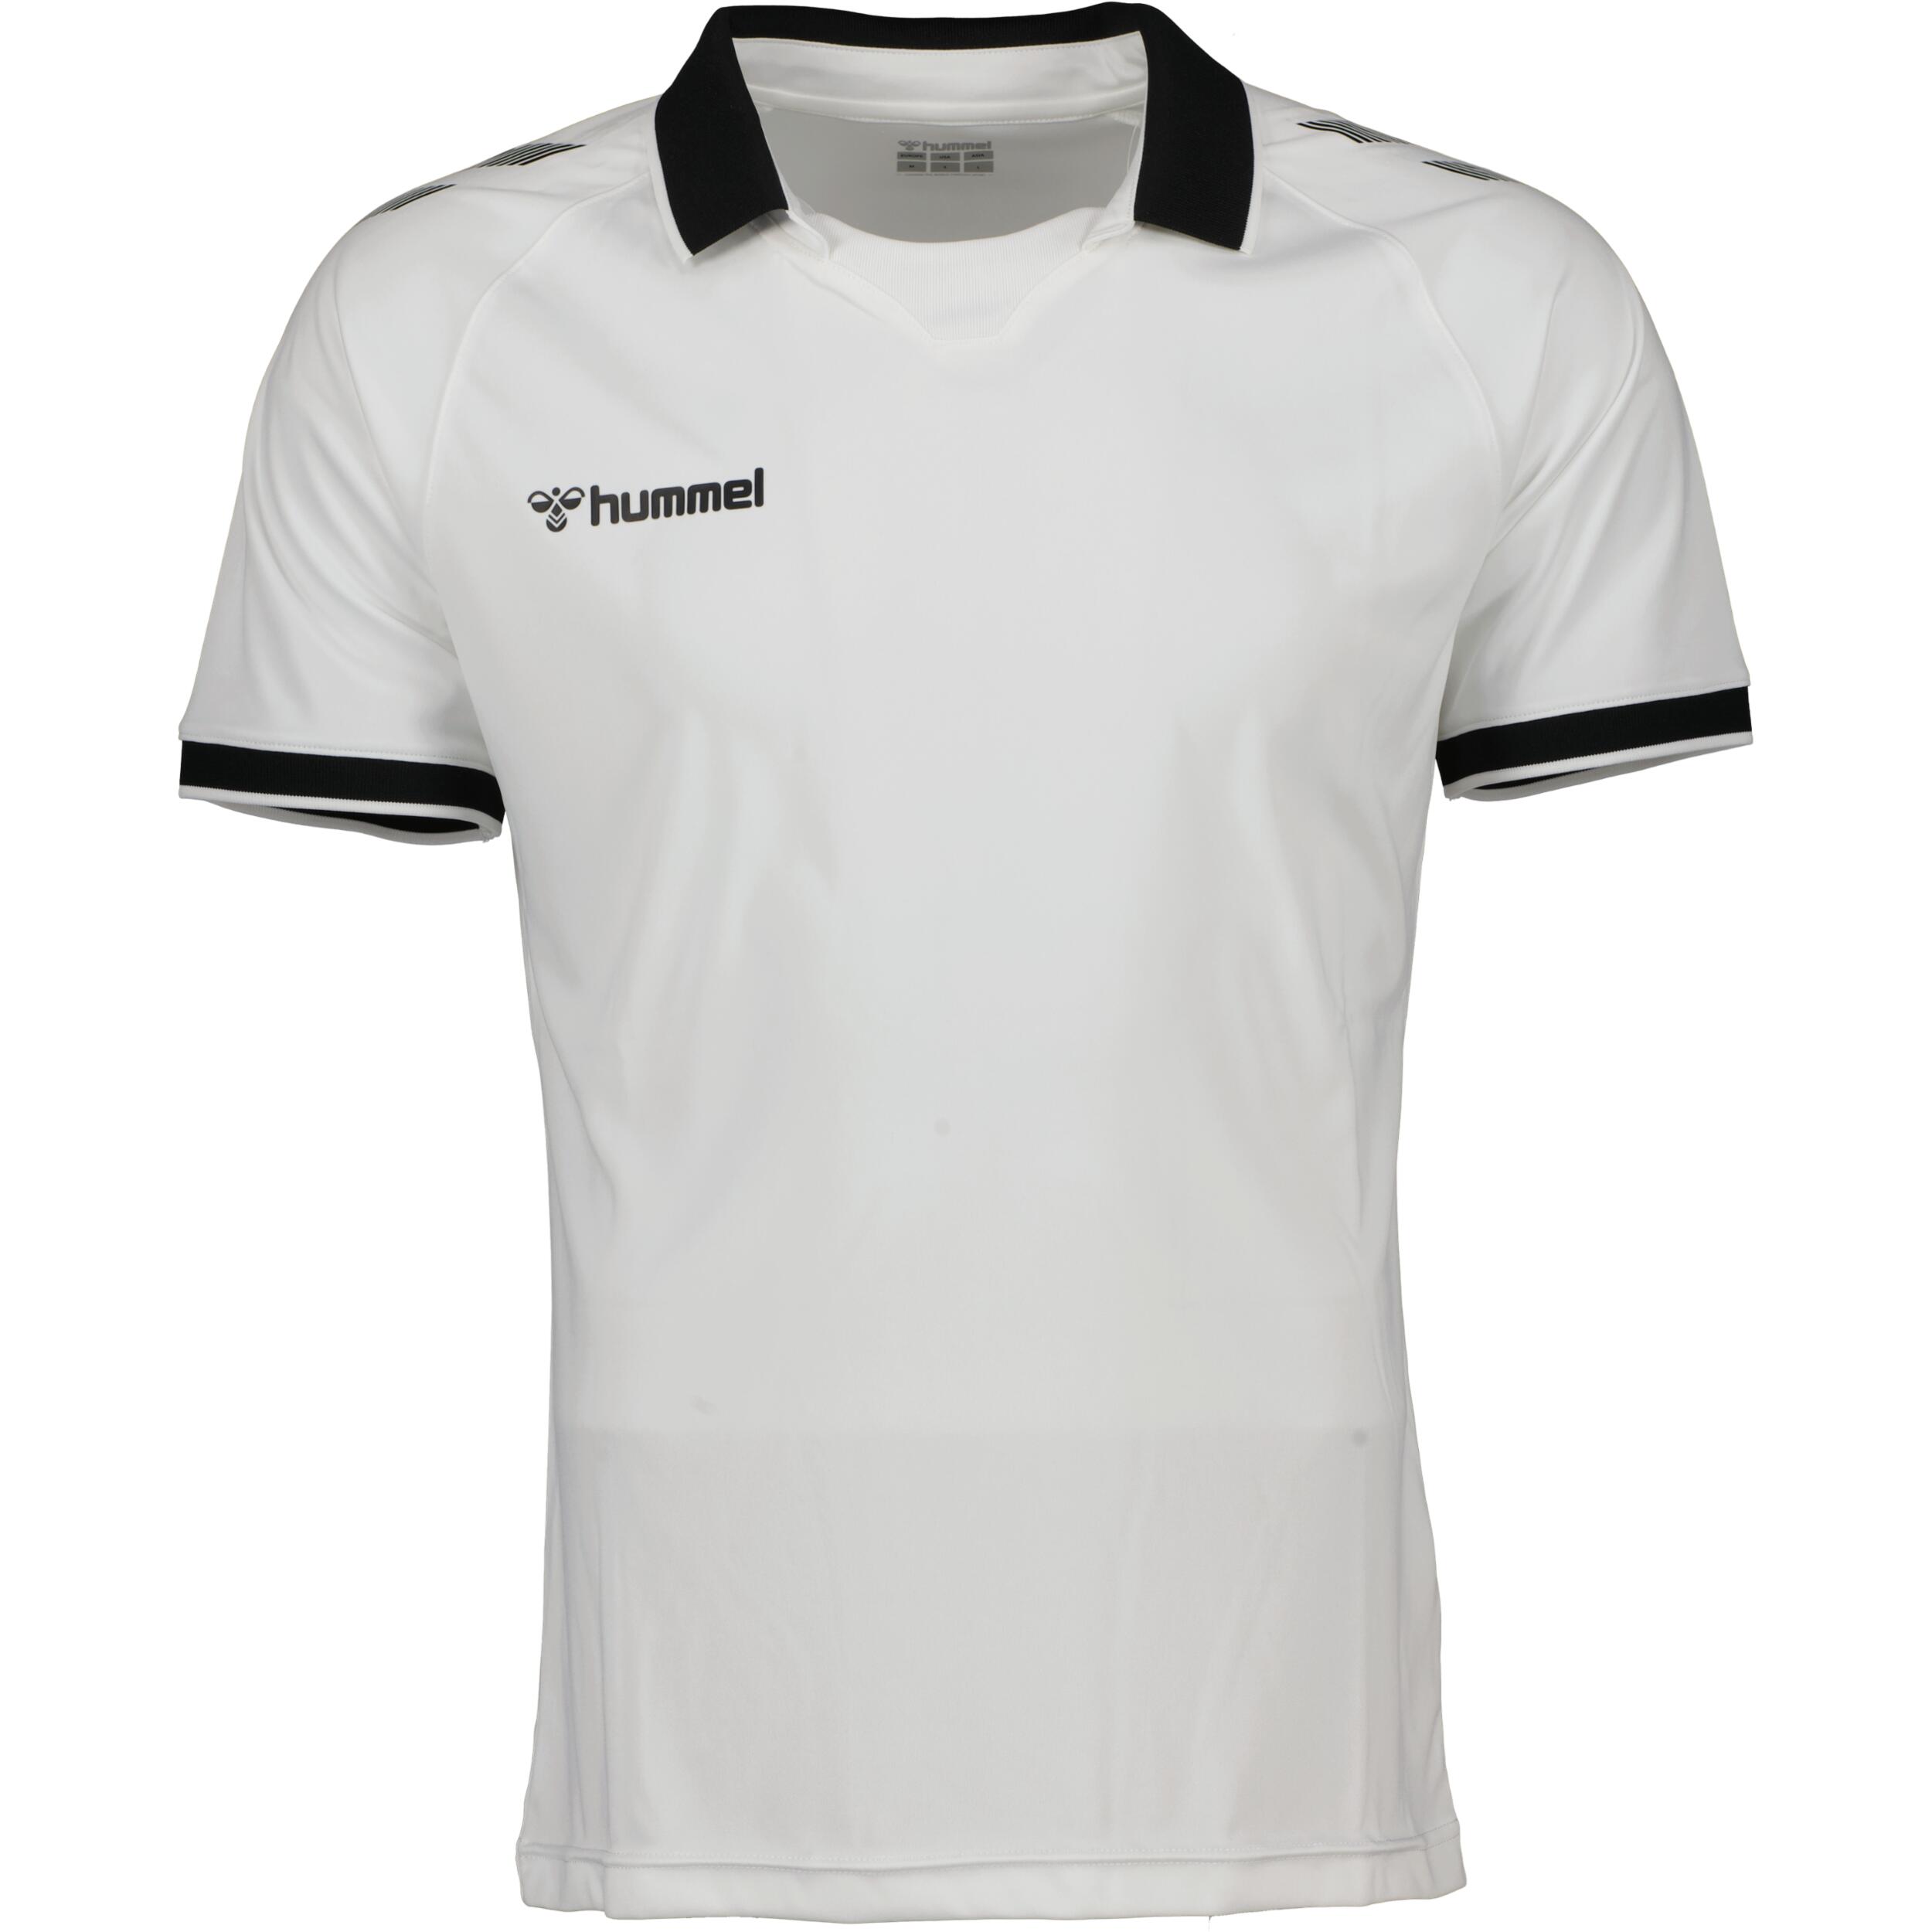 Impact jersey for men, great for football, in white/black 1/3